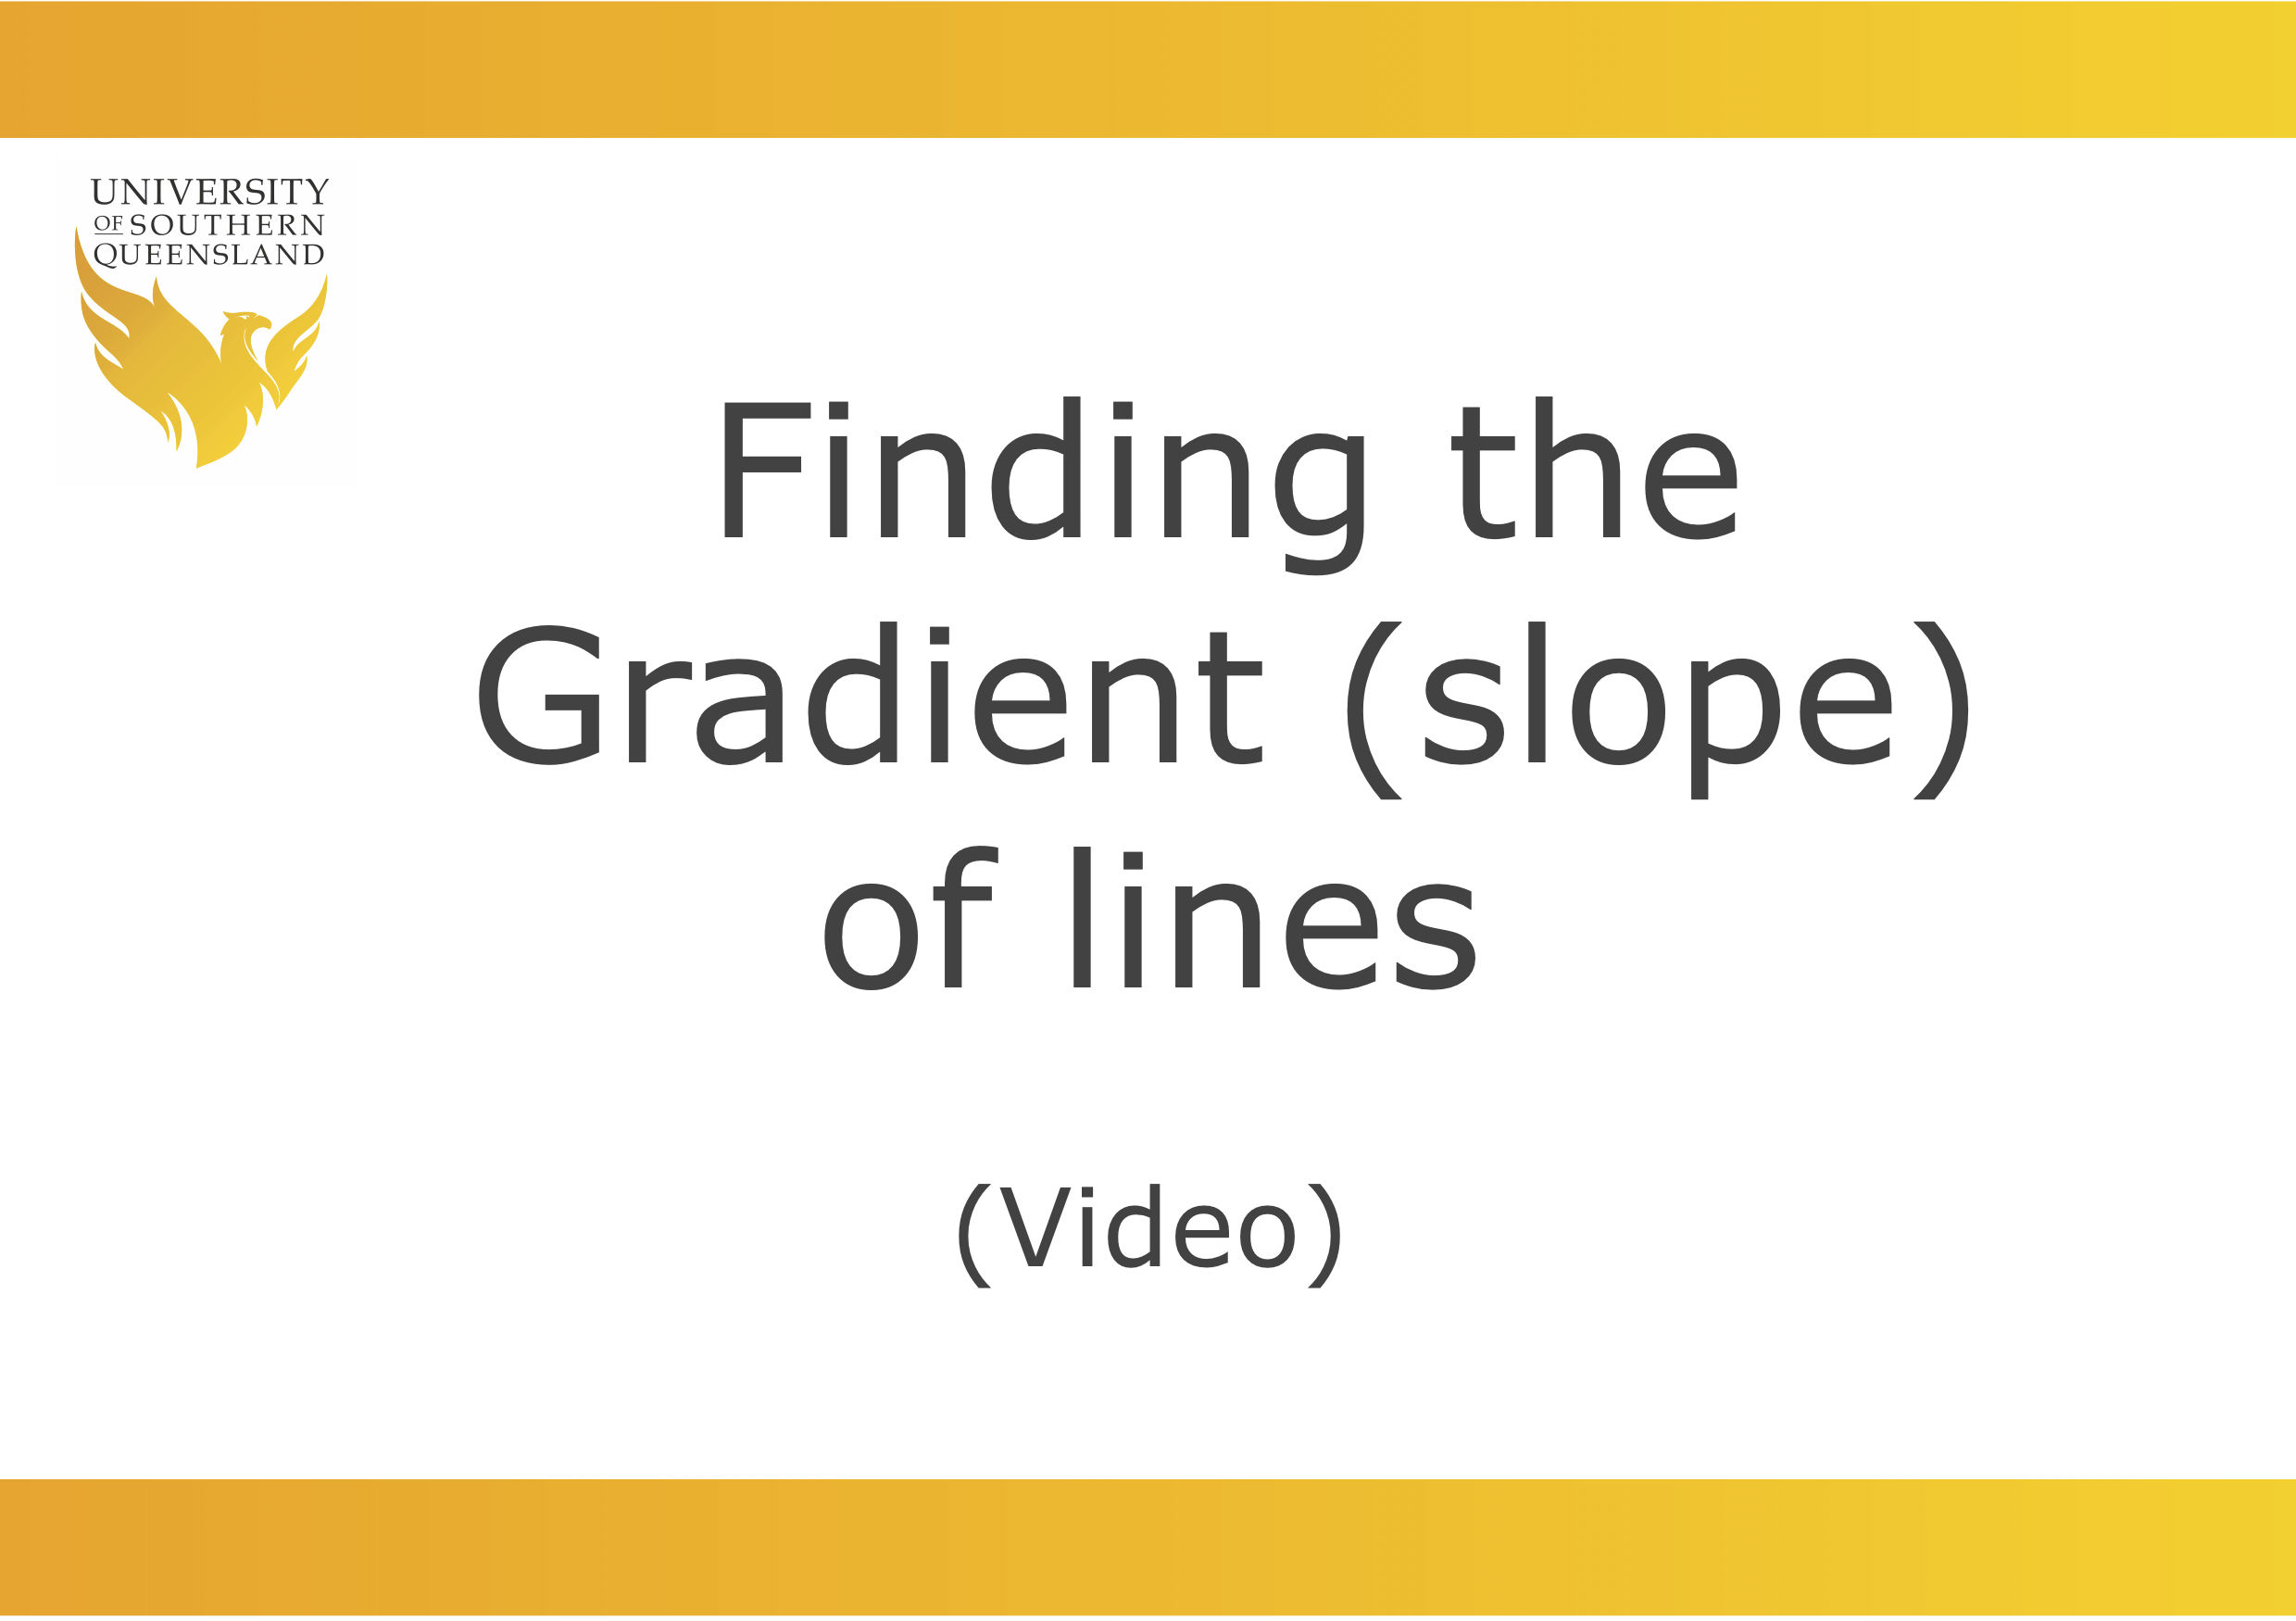 Image to play the video: gradient 